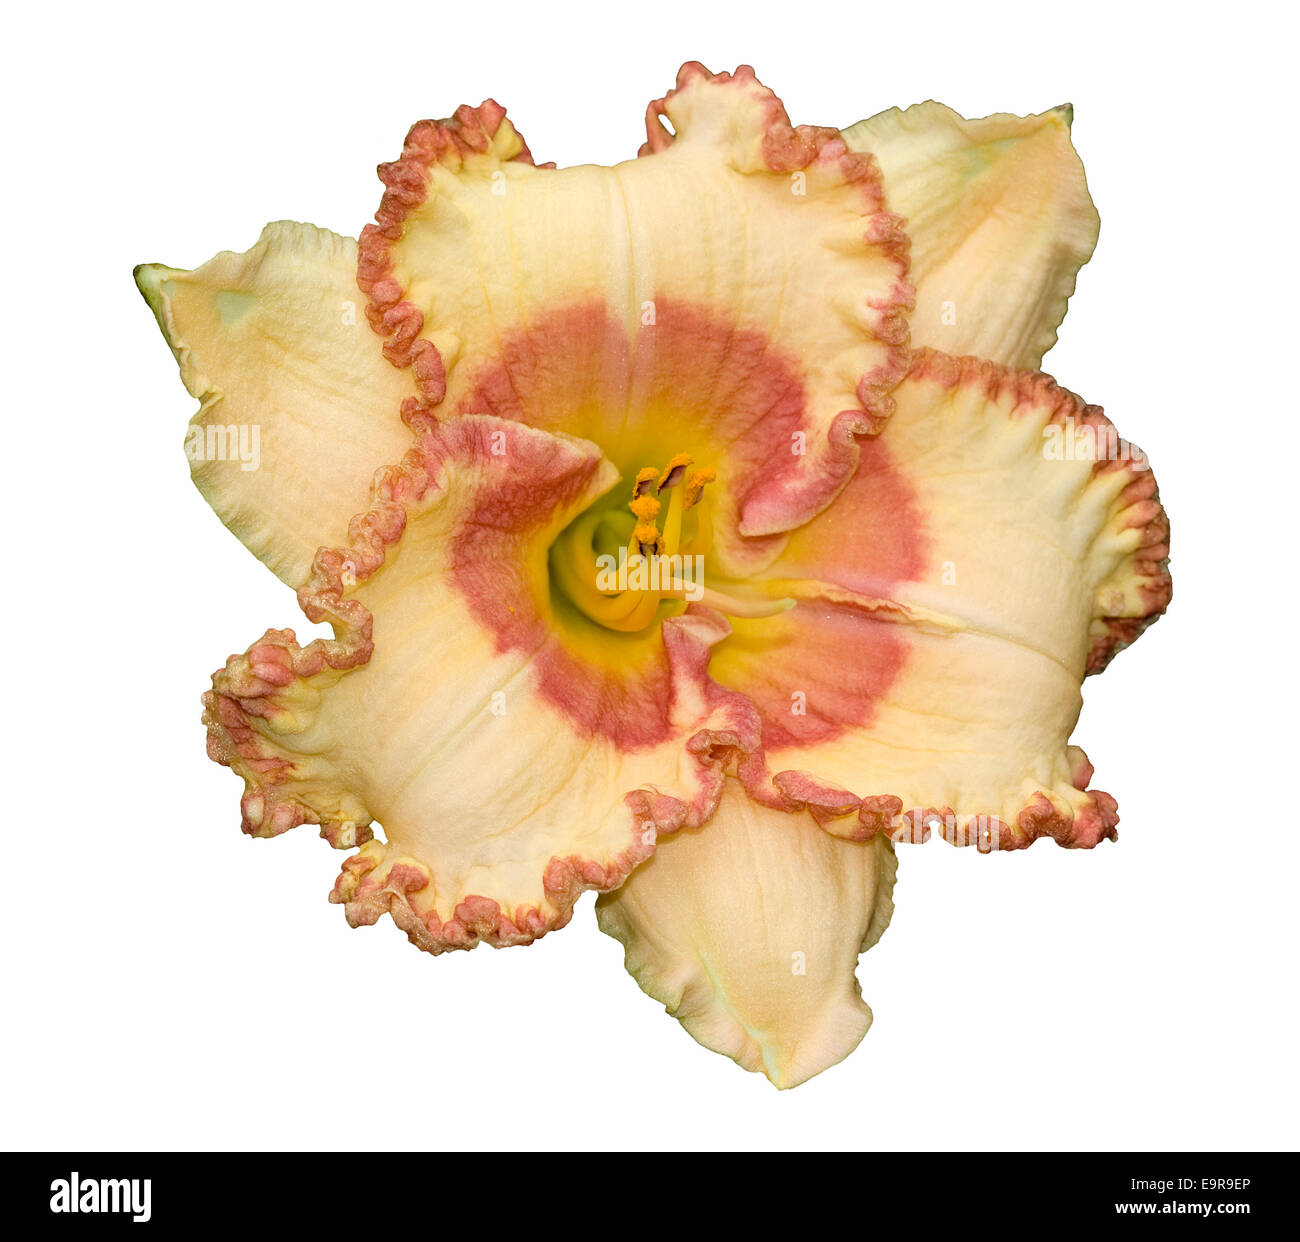 Spectacular apricot / yellow daylily flower with frilly petals edged with red - Hemerocallis  Braided Edges on white background Stock Photo